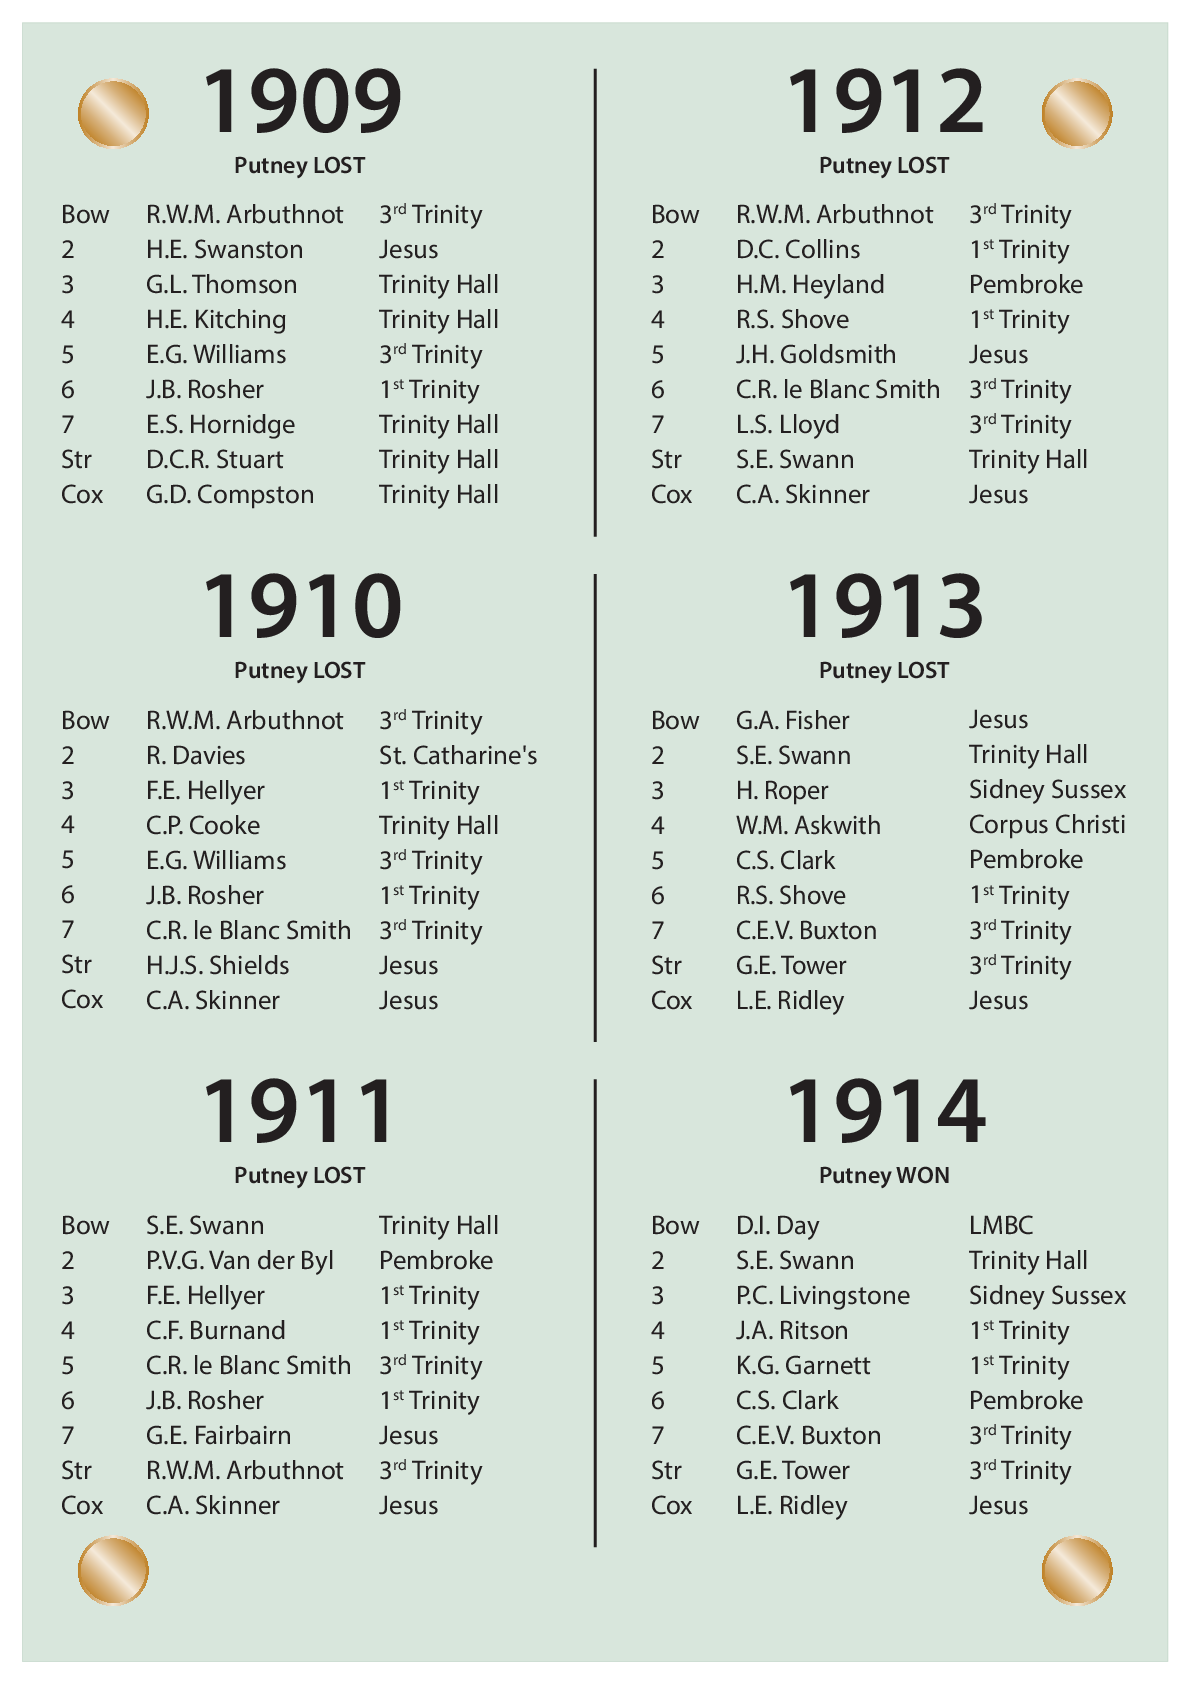 CUBC Crews And Results - 1909 – 1914